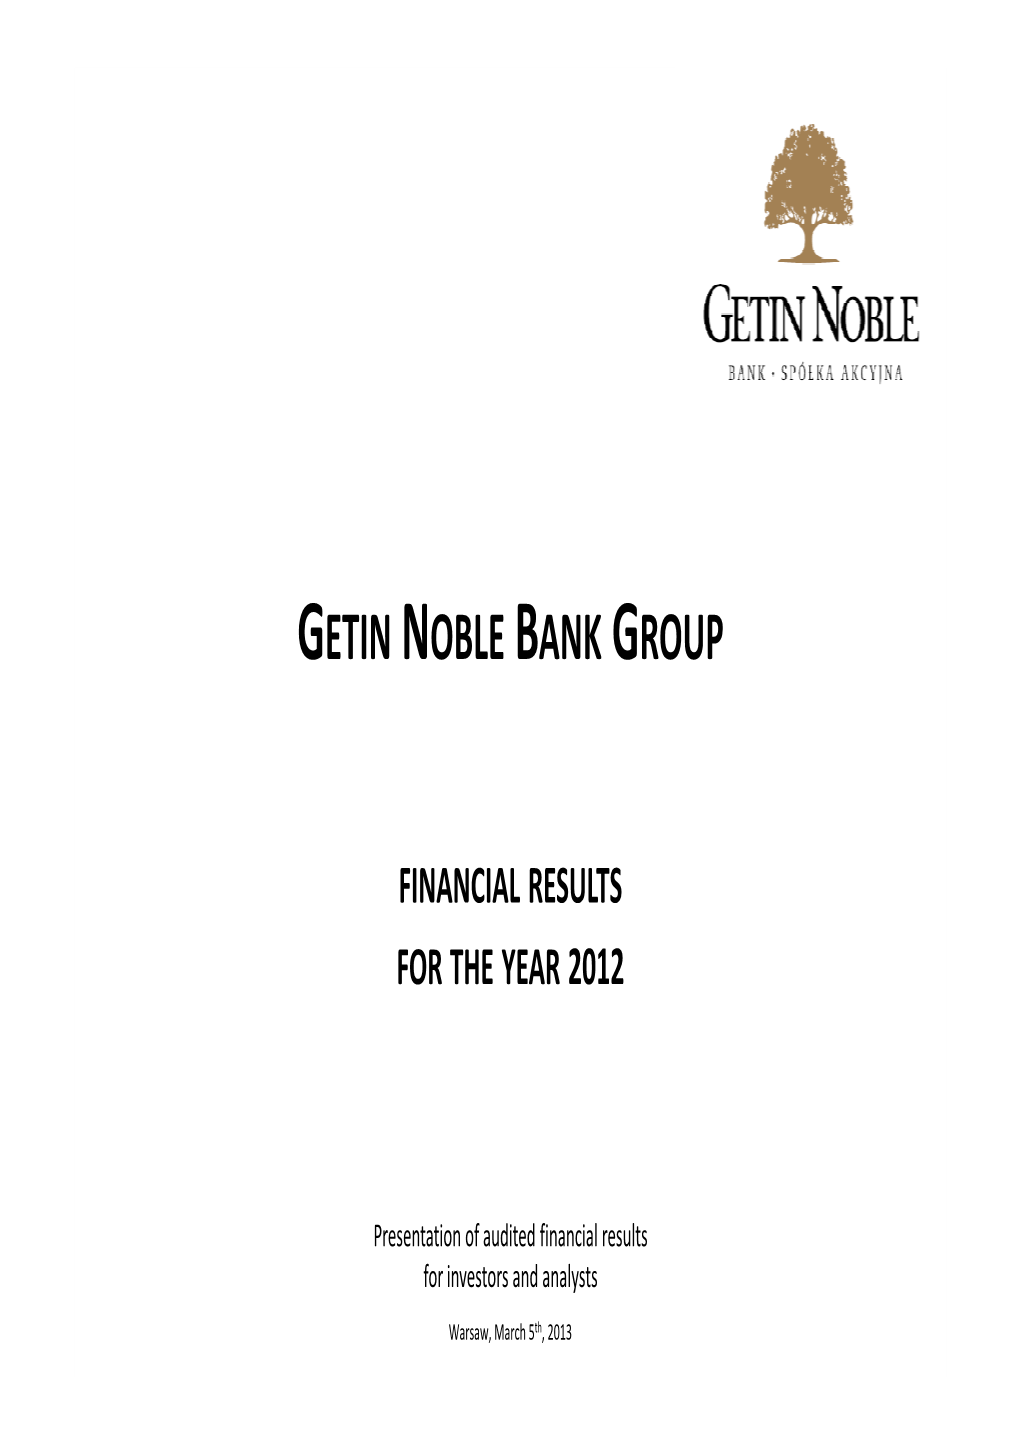 Getin Noble Bank Group